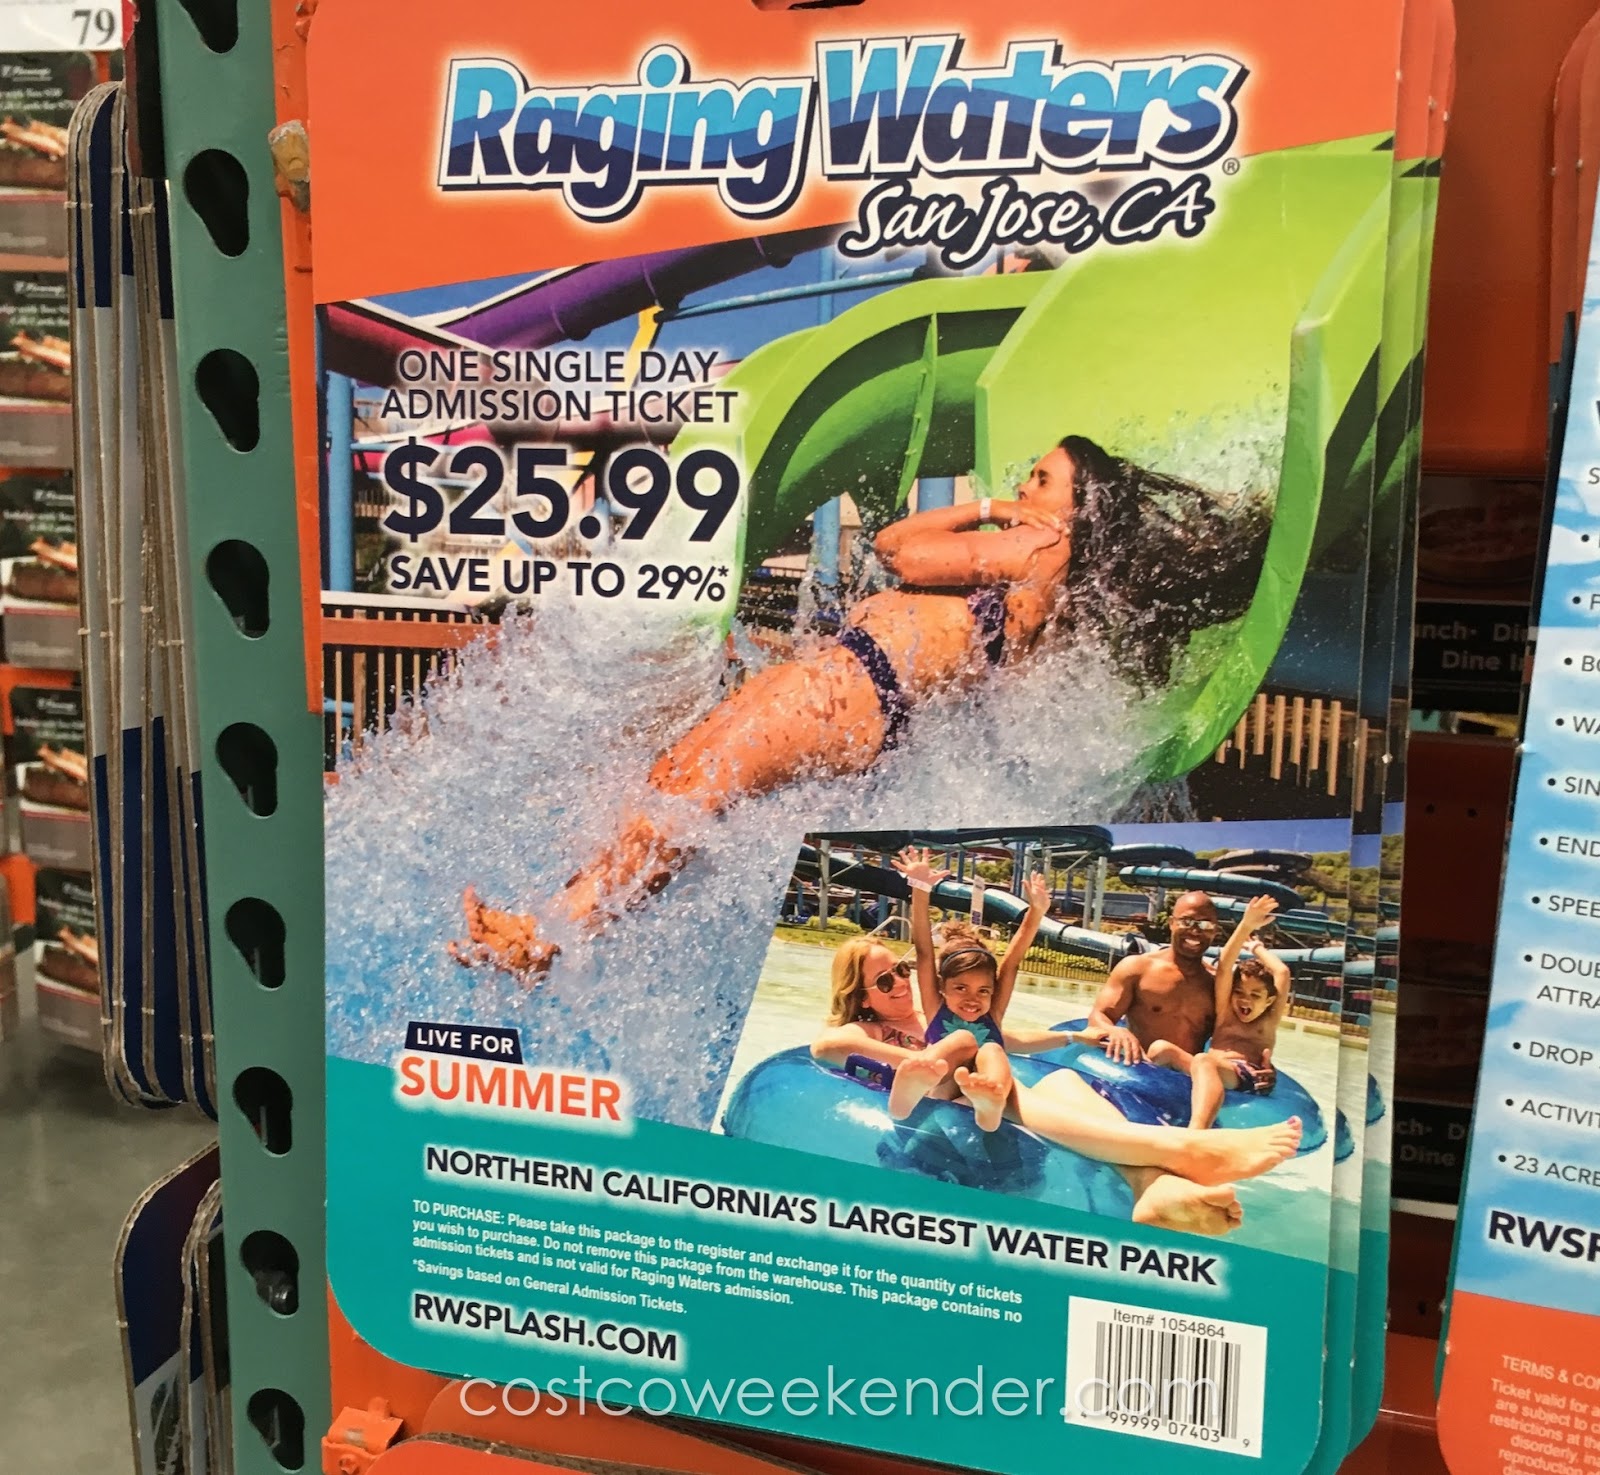 Raging Waters 2016 Adult Single Day Admission Ticket Costco Weekender